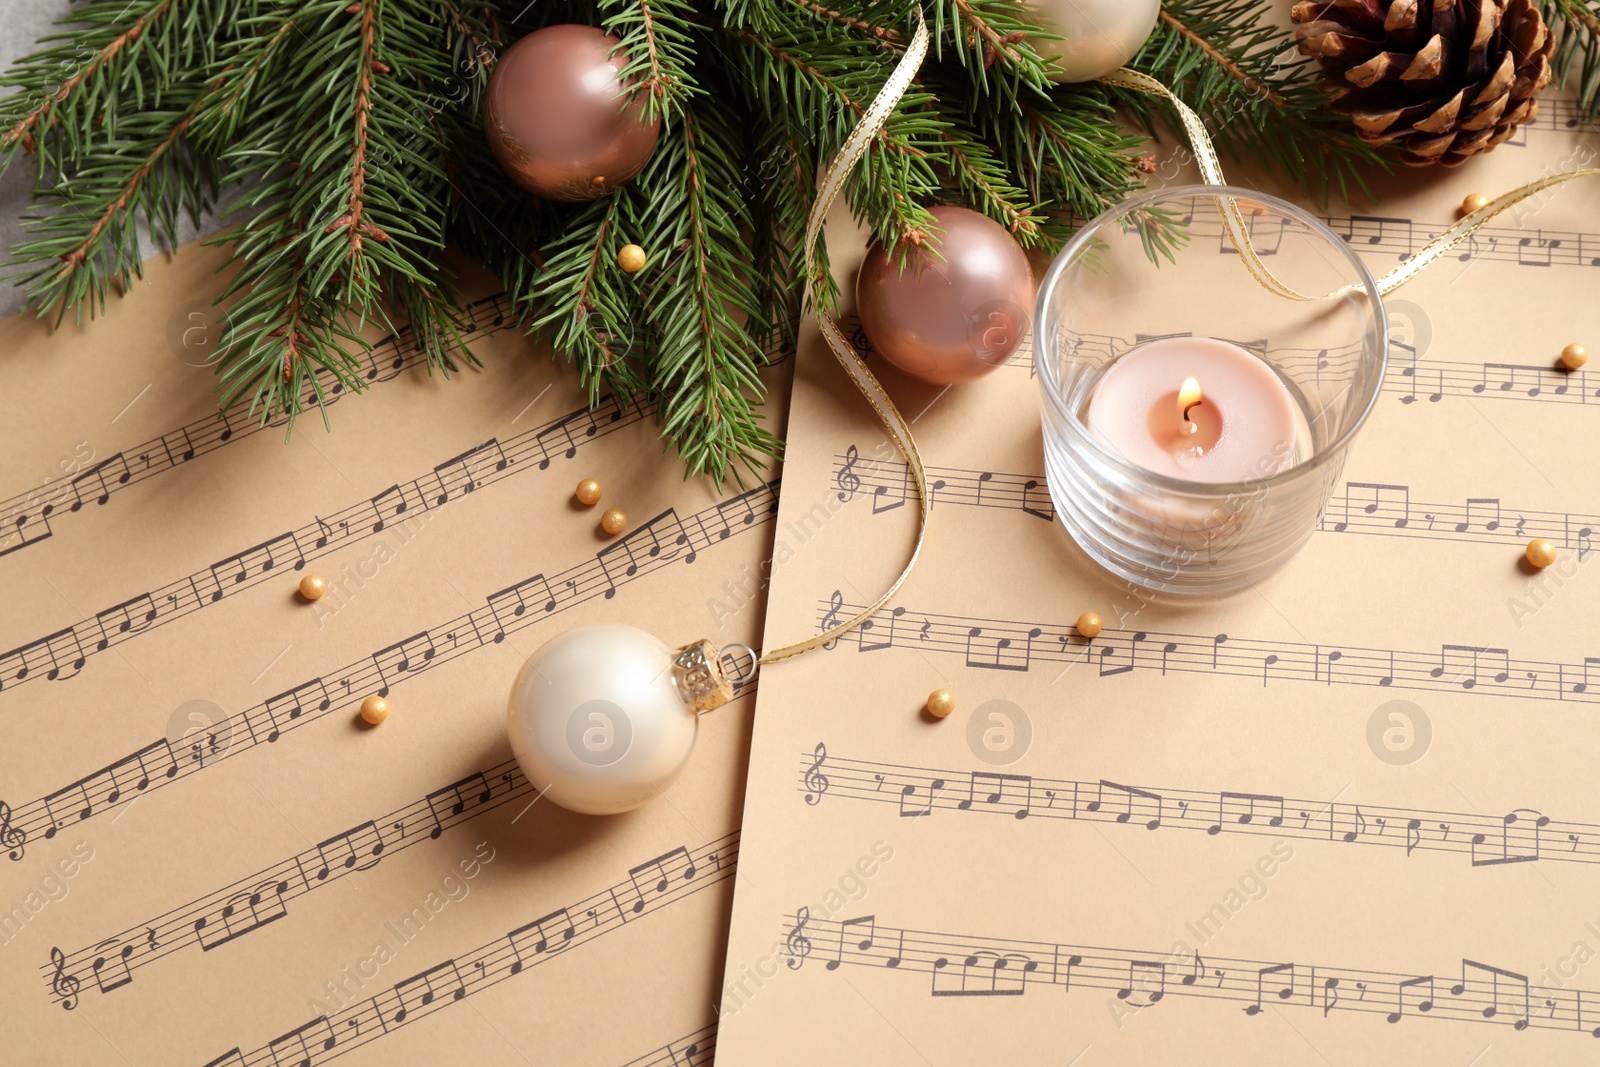 Photo of Composition with Christmas decorations on music sheets, above view